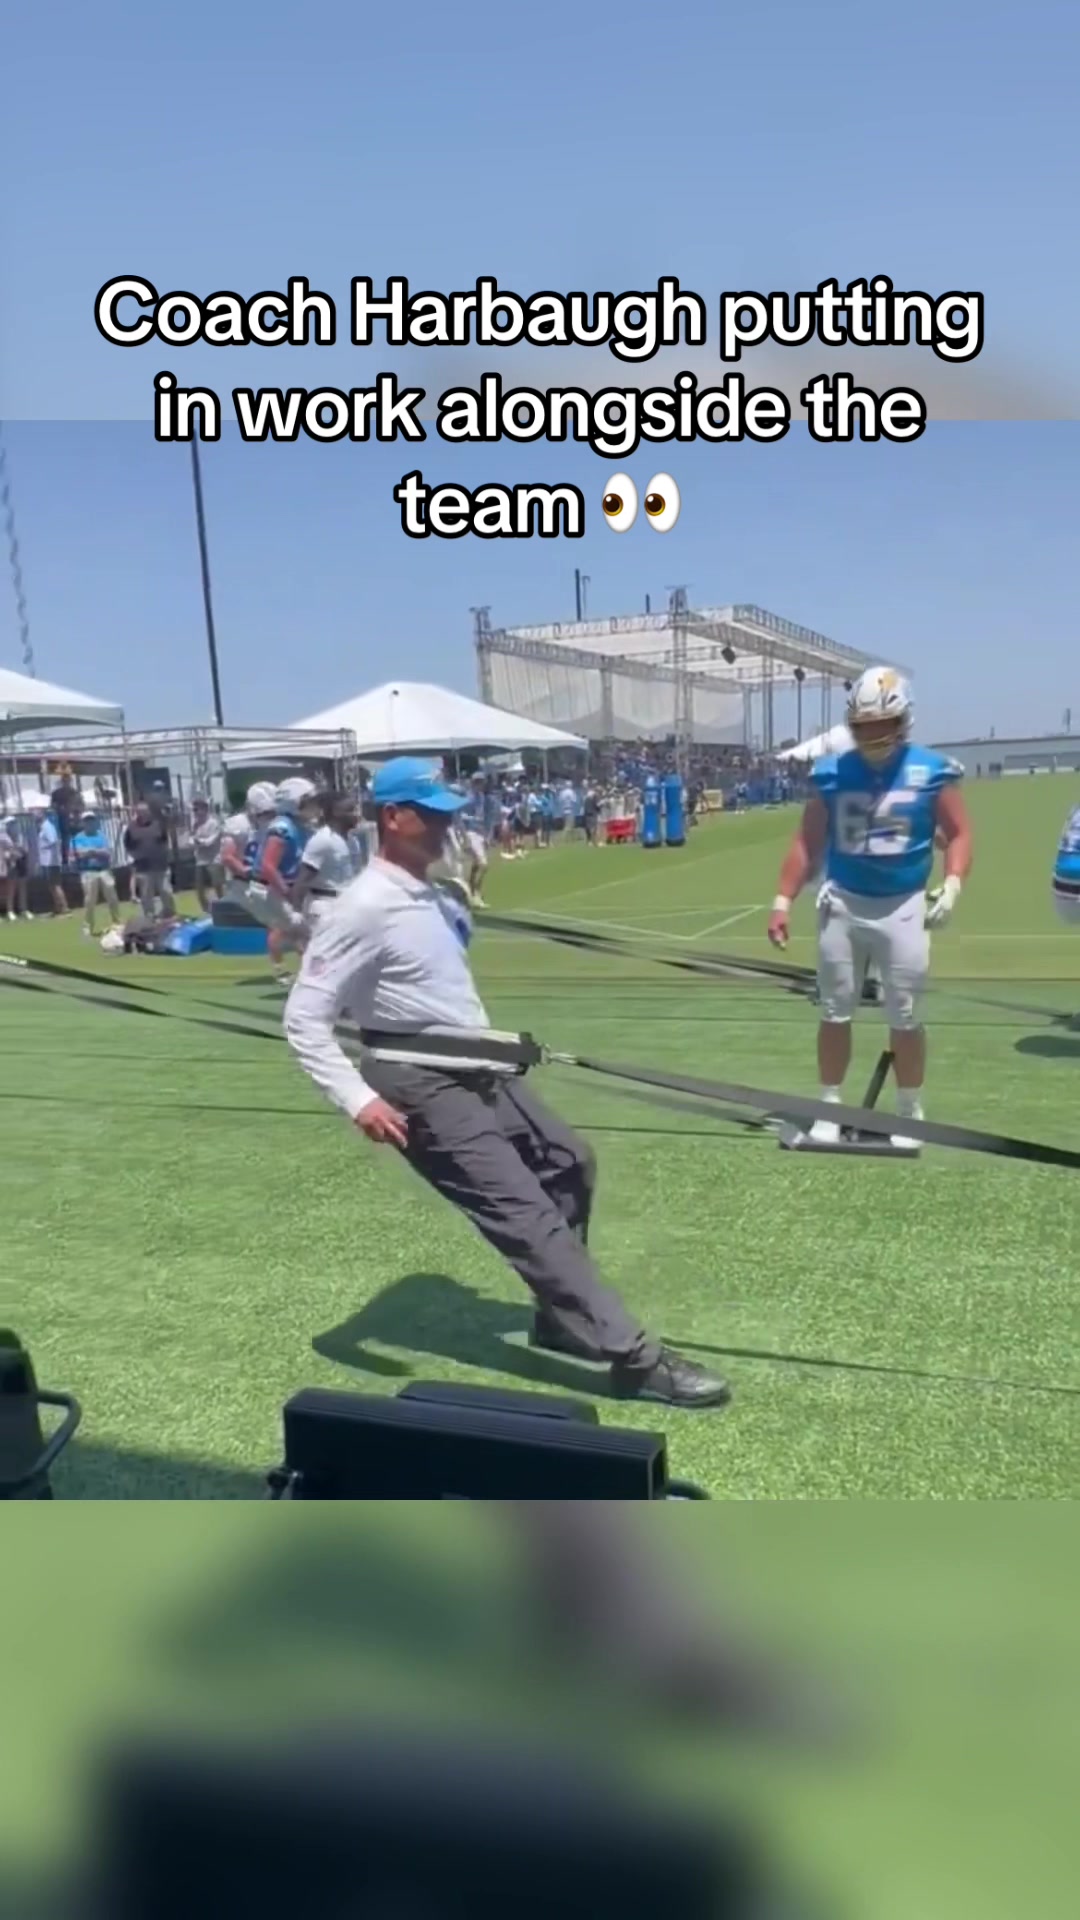 Slight work for Jim Harbaugh 😂 (via @los angeles chargers) #chargers #coach #workout